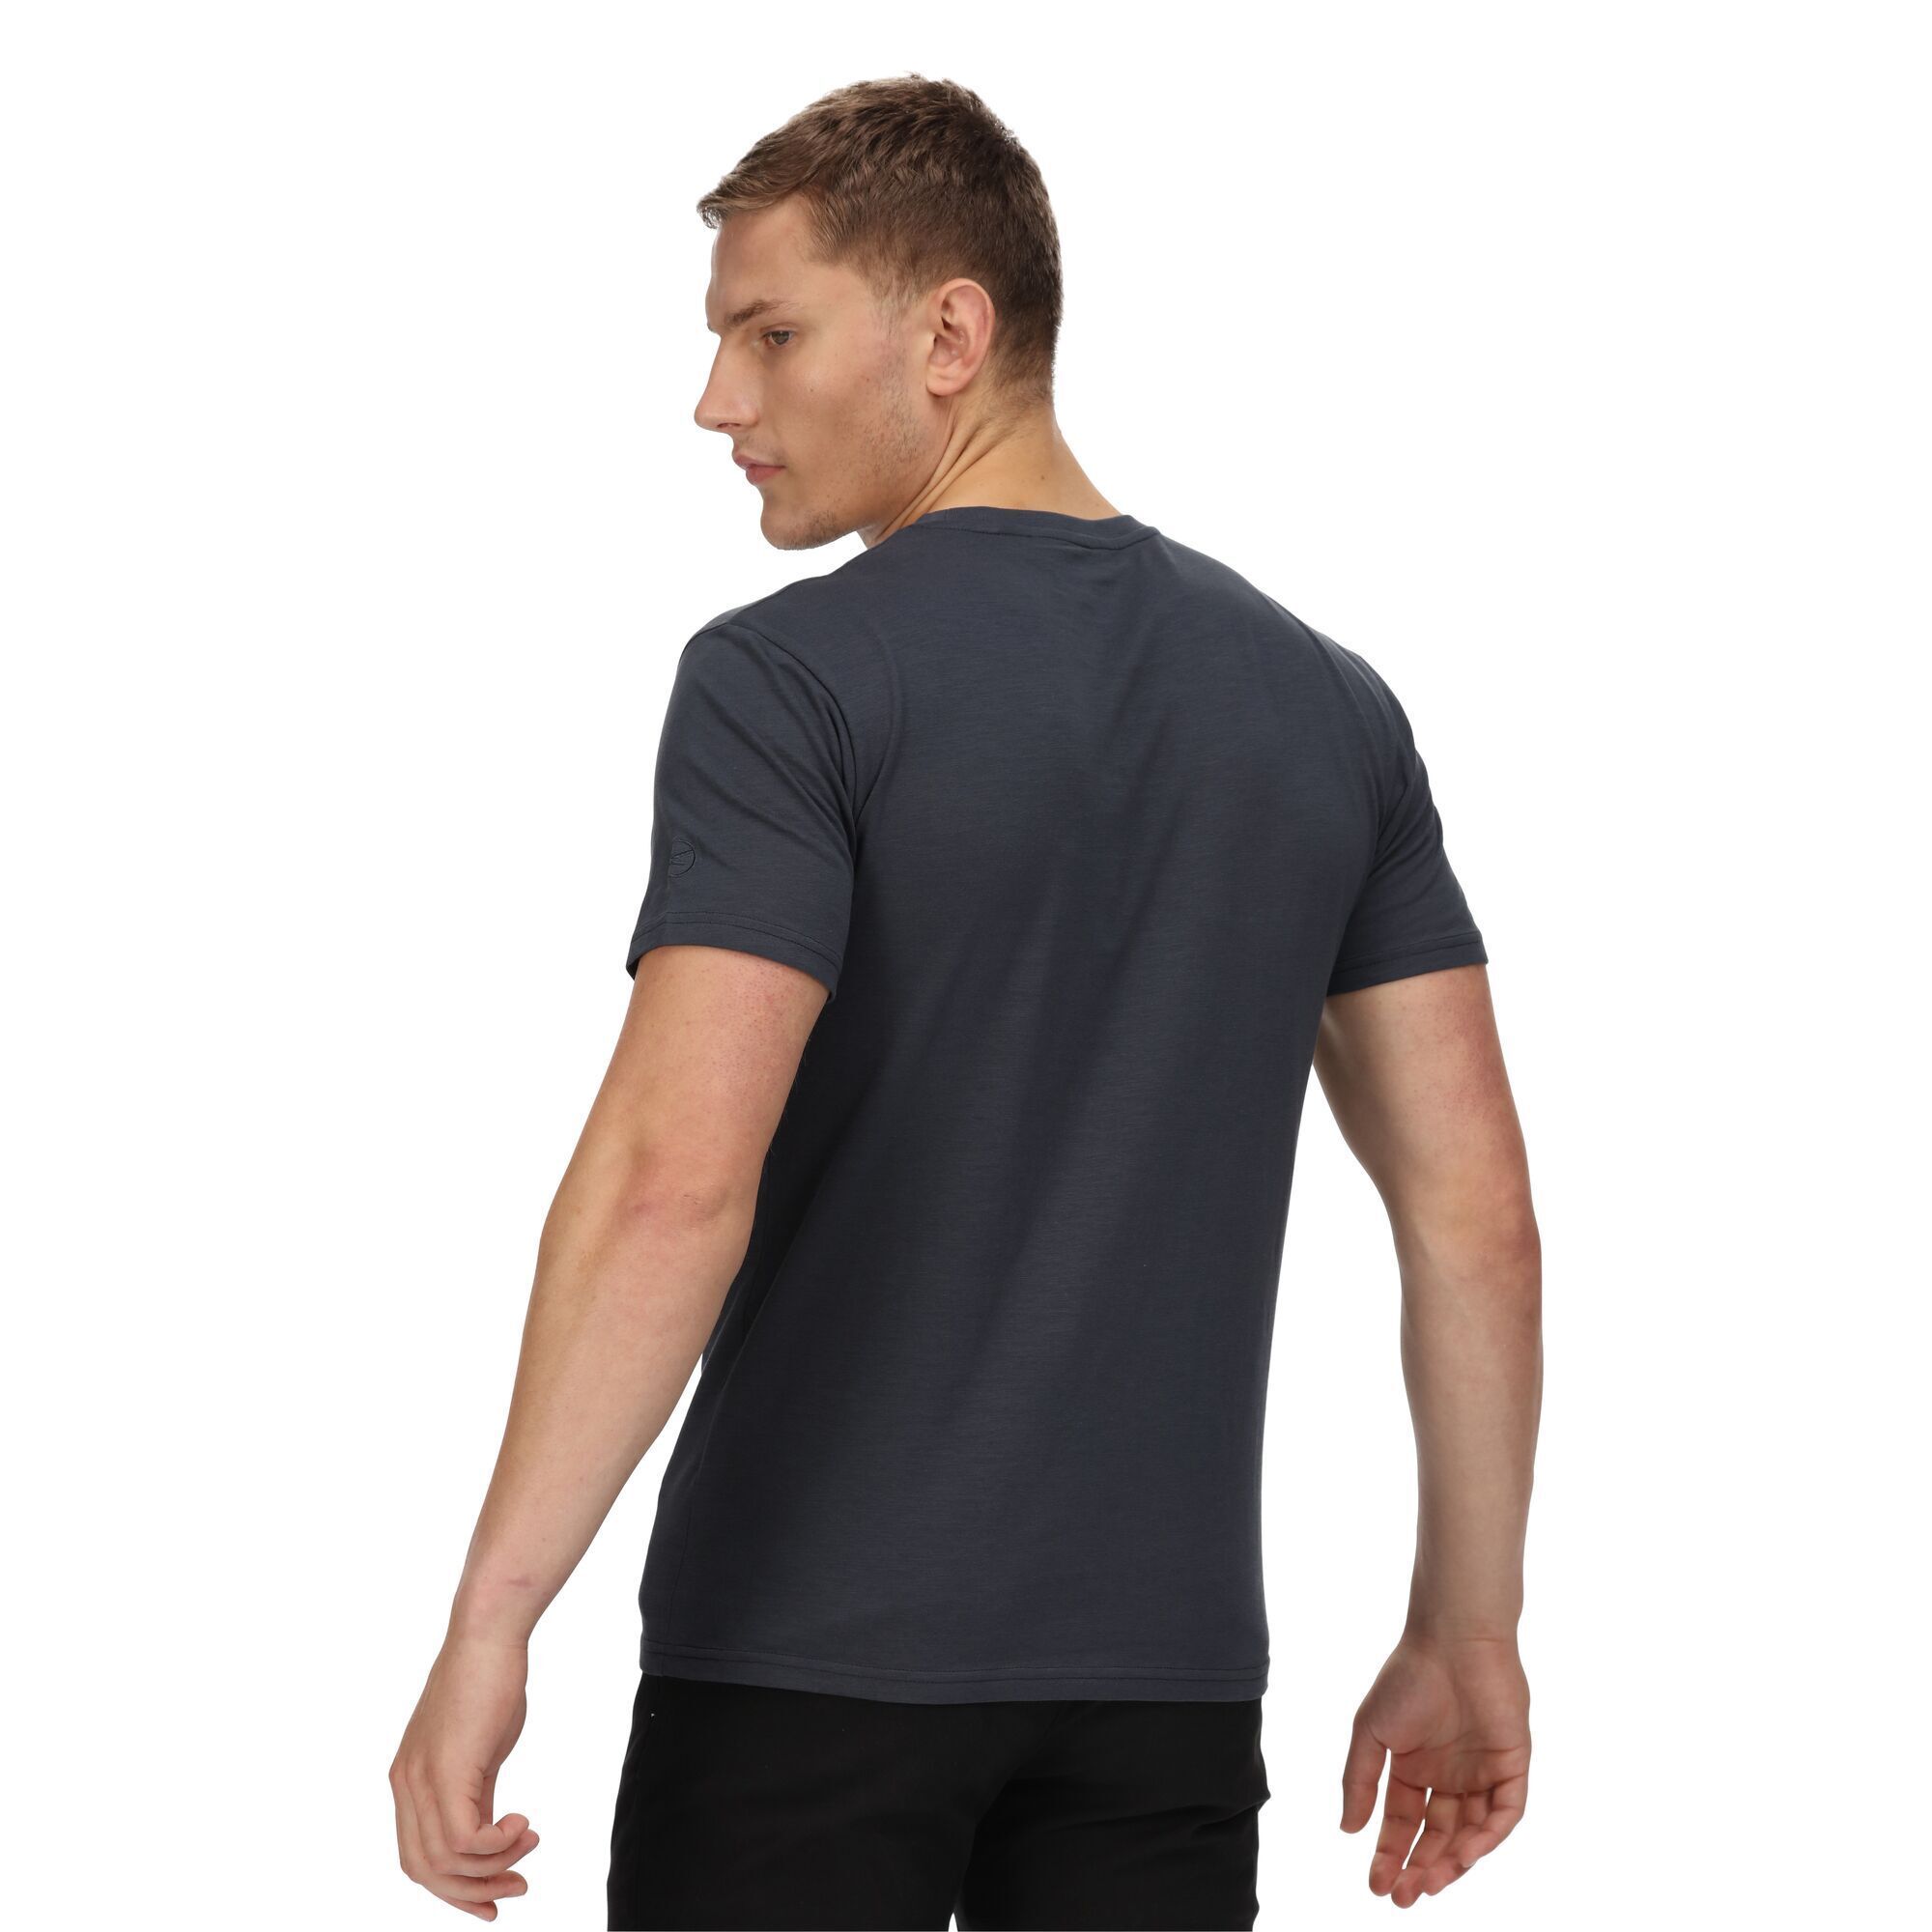 100% Cotton. Fabric: Coolweave, Slub, Soft Touch. Design: Plain. Pockets: 1 Chest Pocket. Neckline: Crew Neck. Sleeve-Type: Short-Sleeved. Fabric Technology: Breathable, Lightweight. Sustainable Materials.